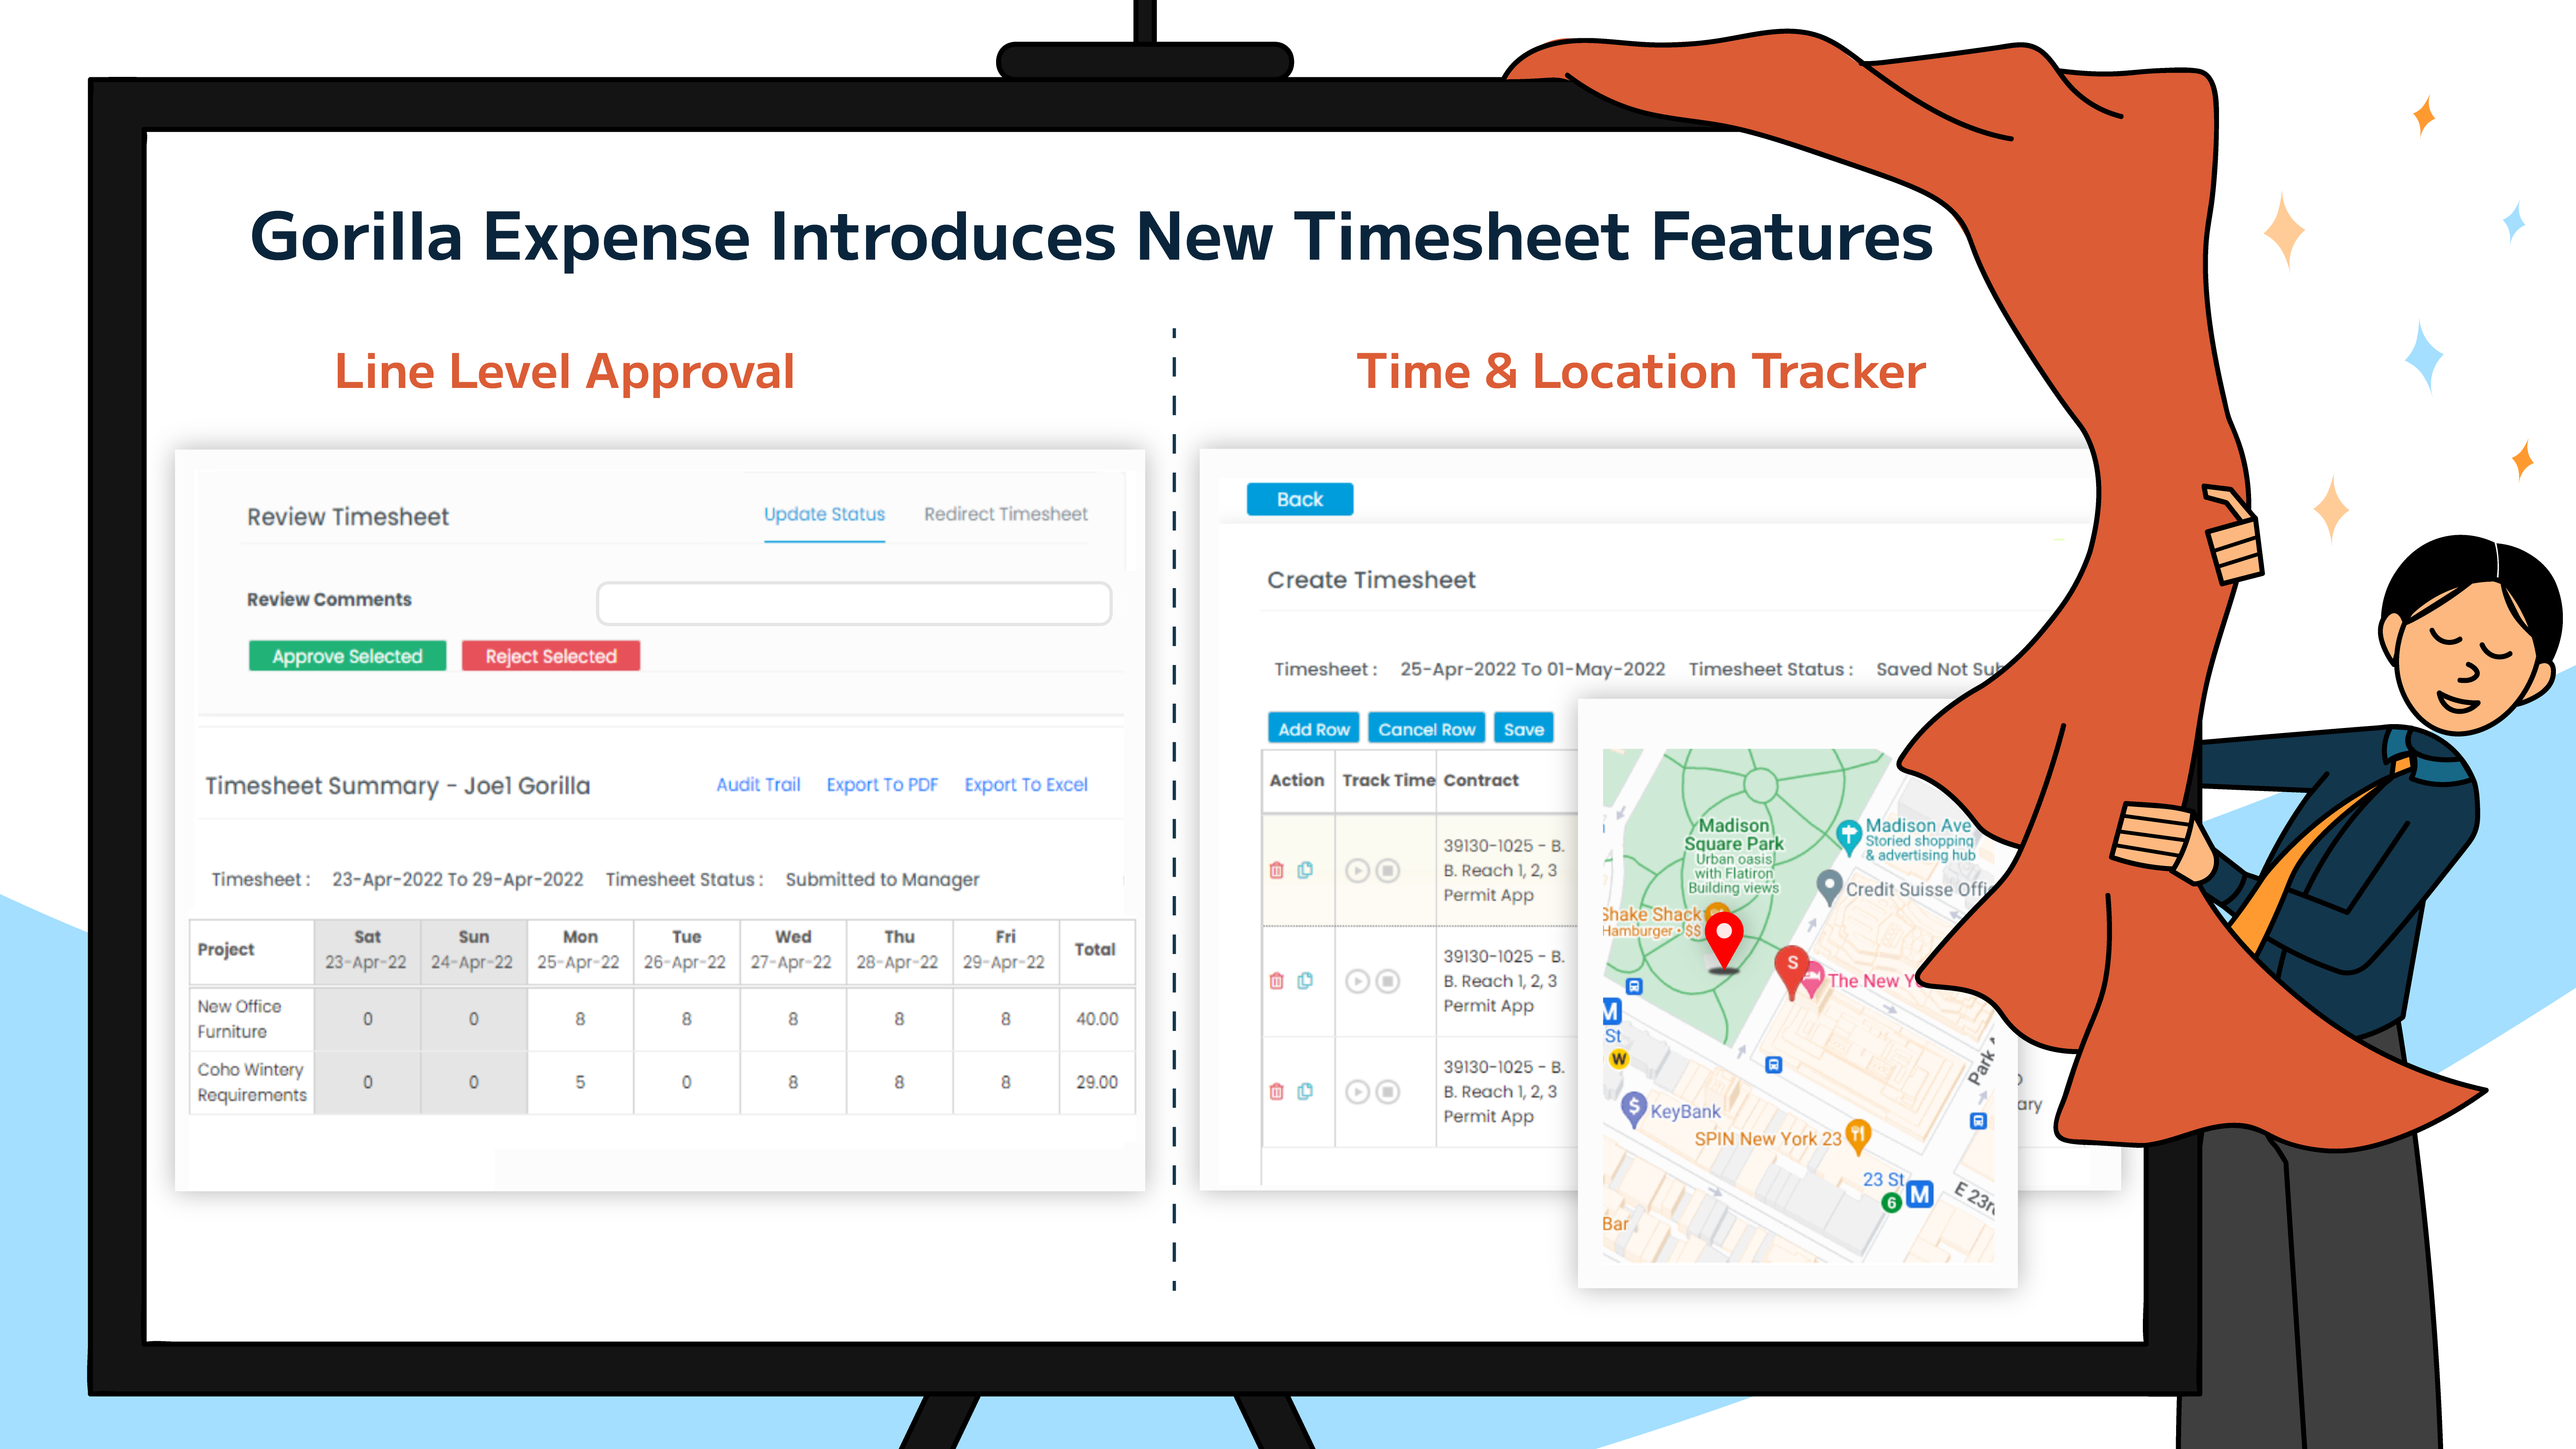 Gorilla Expense Introduces New Timesheet Features